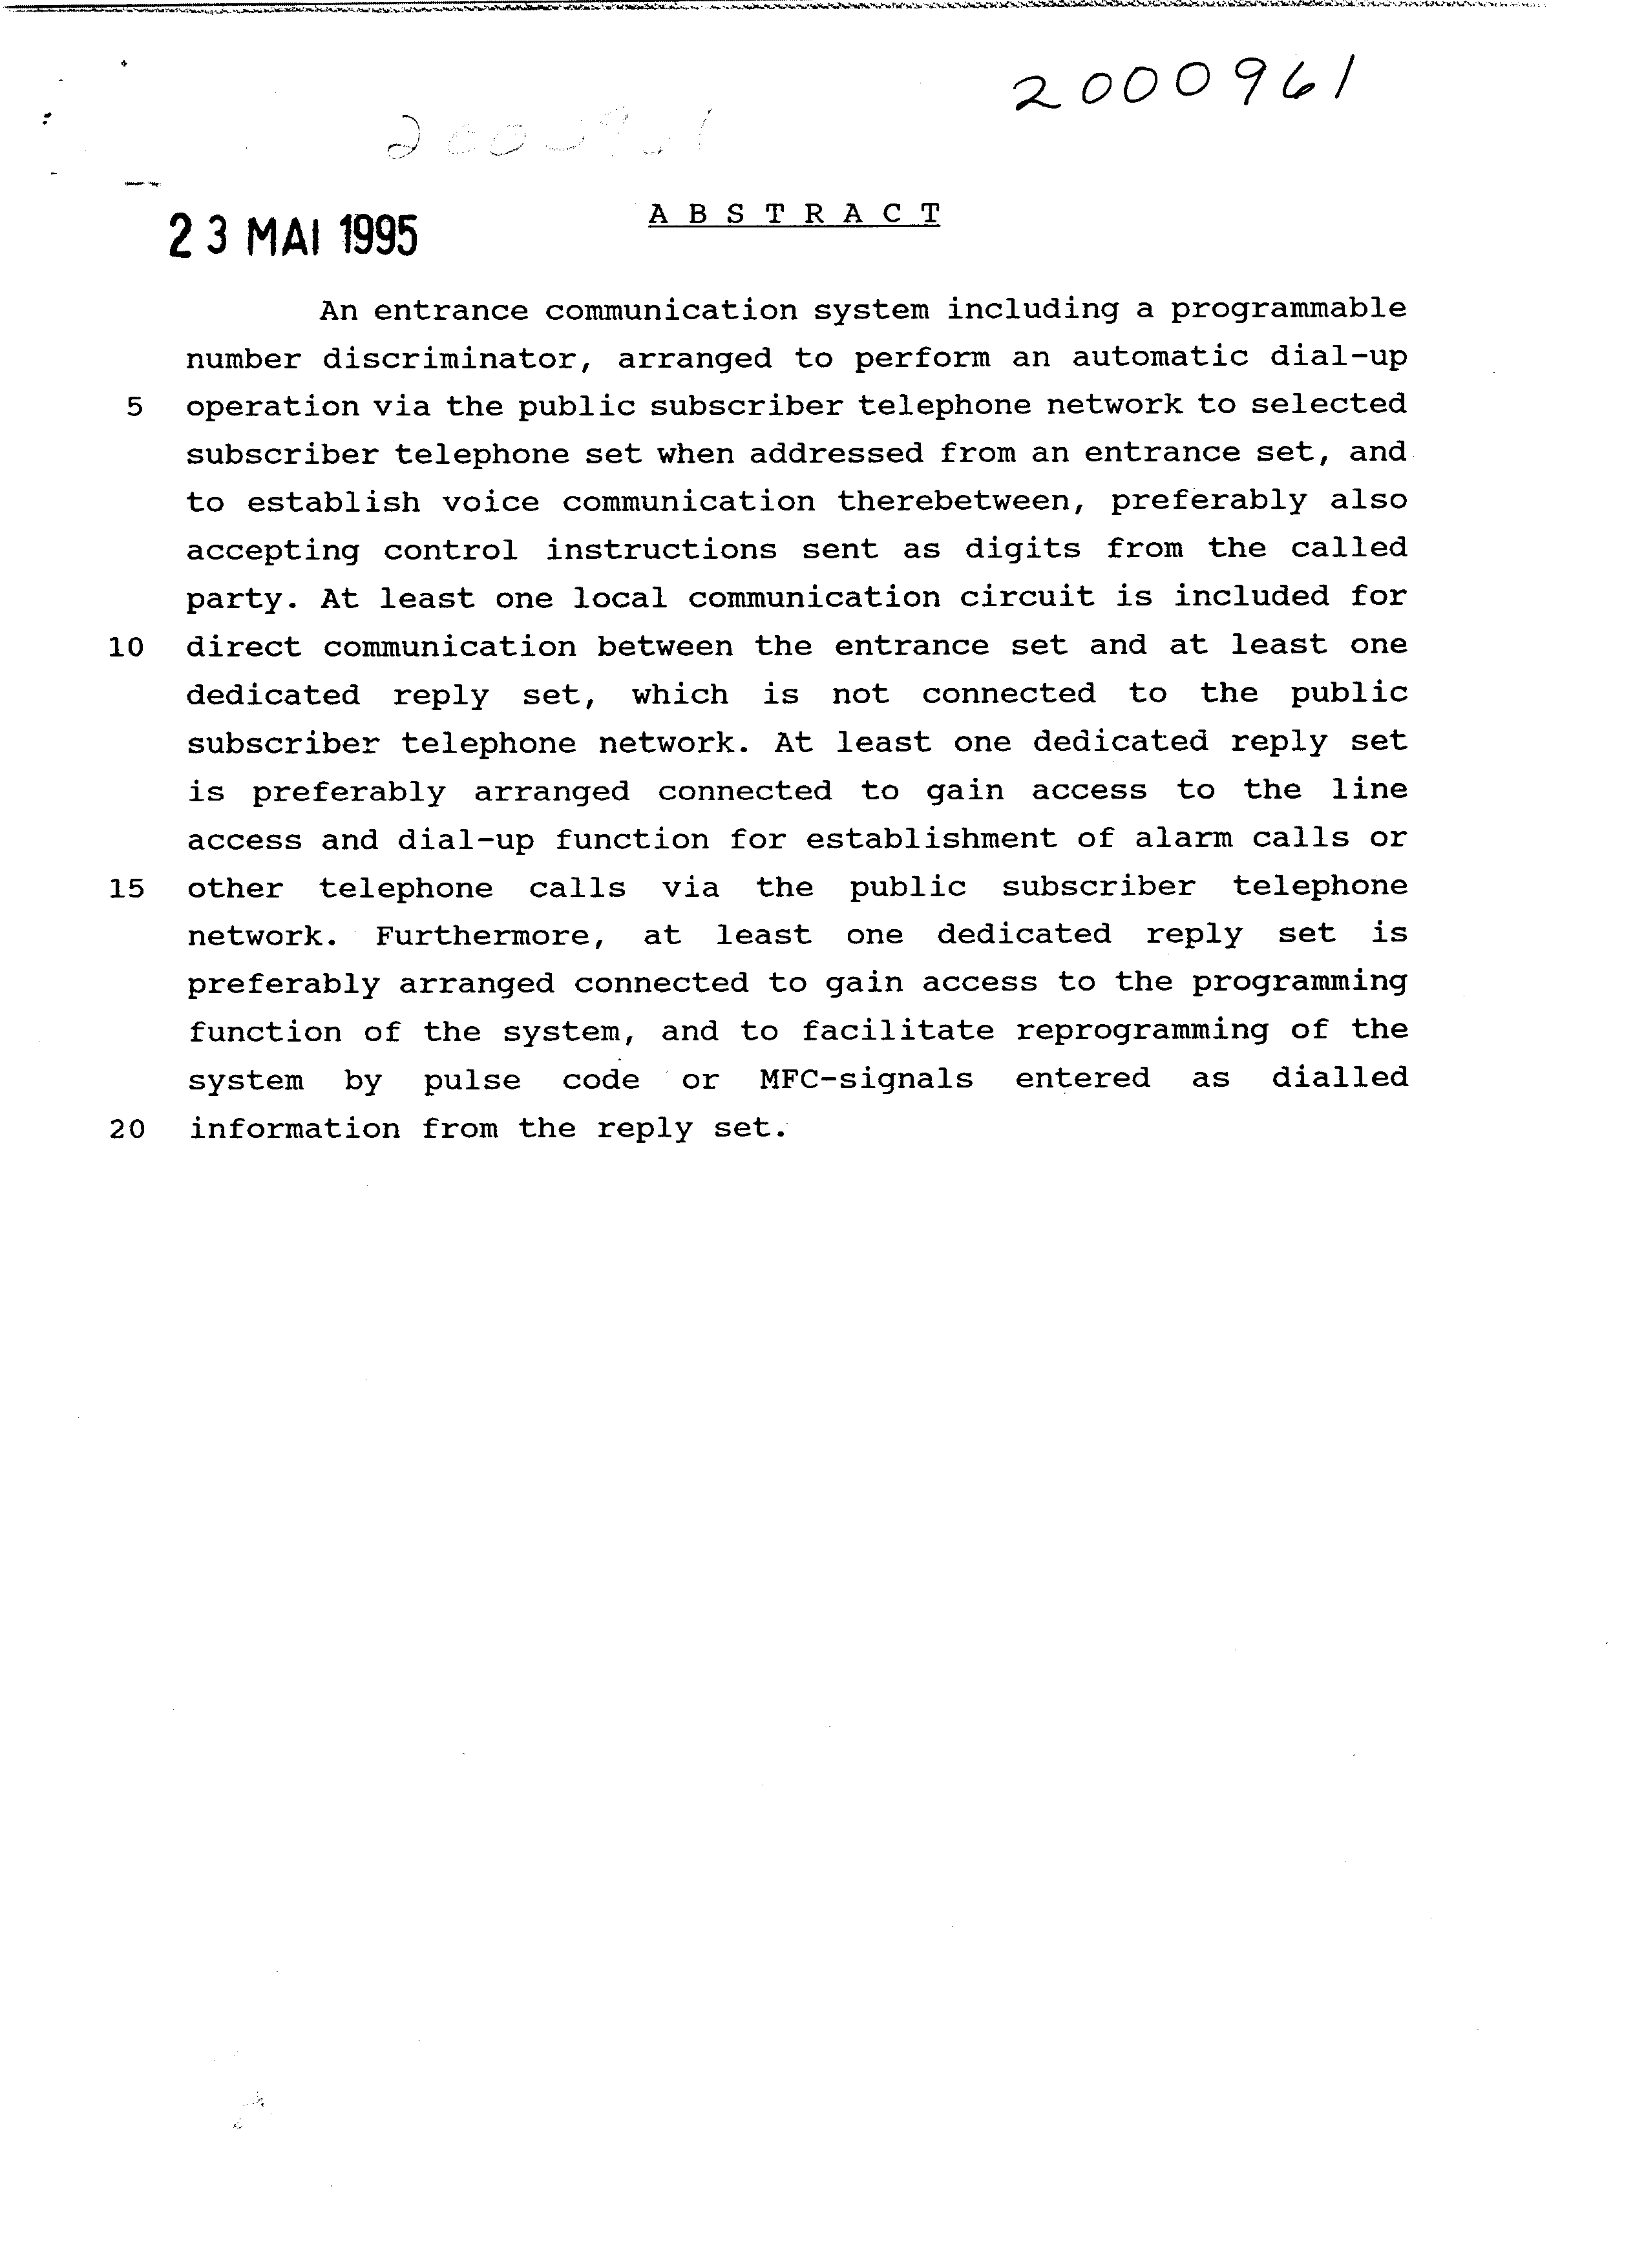 Canadian Patent Document 2000961. Abstract 19950523. Image 1 of 1